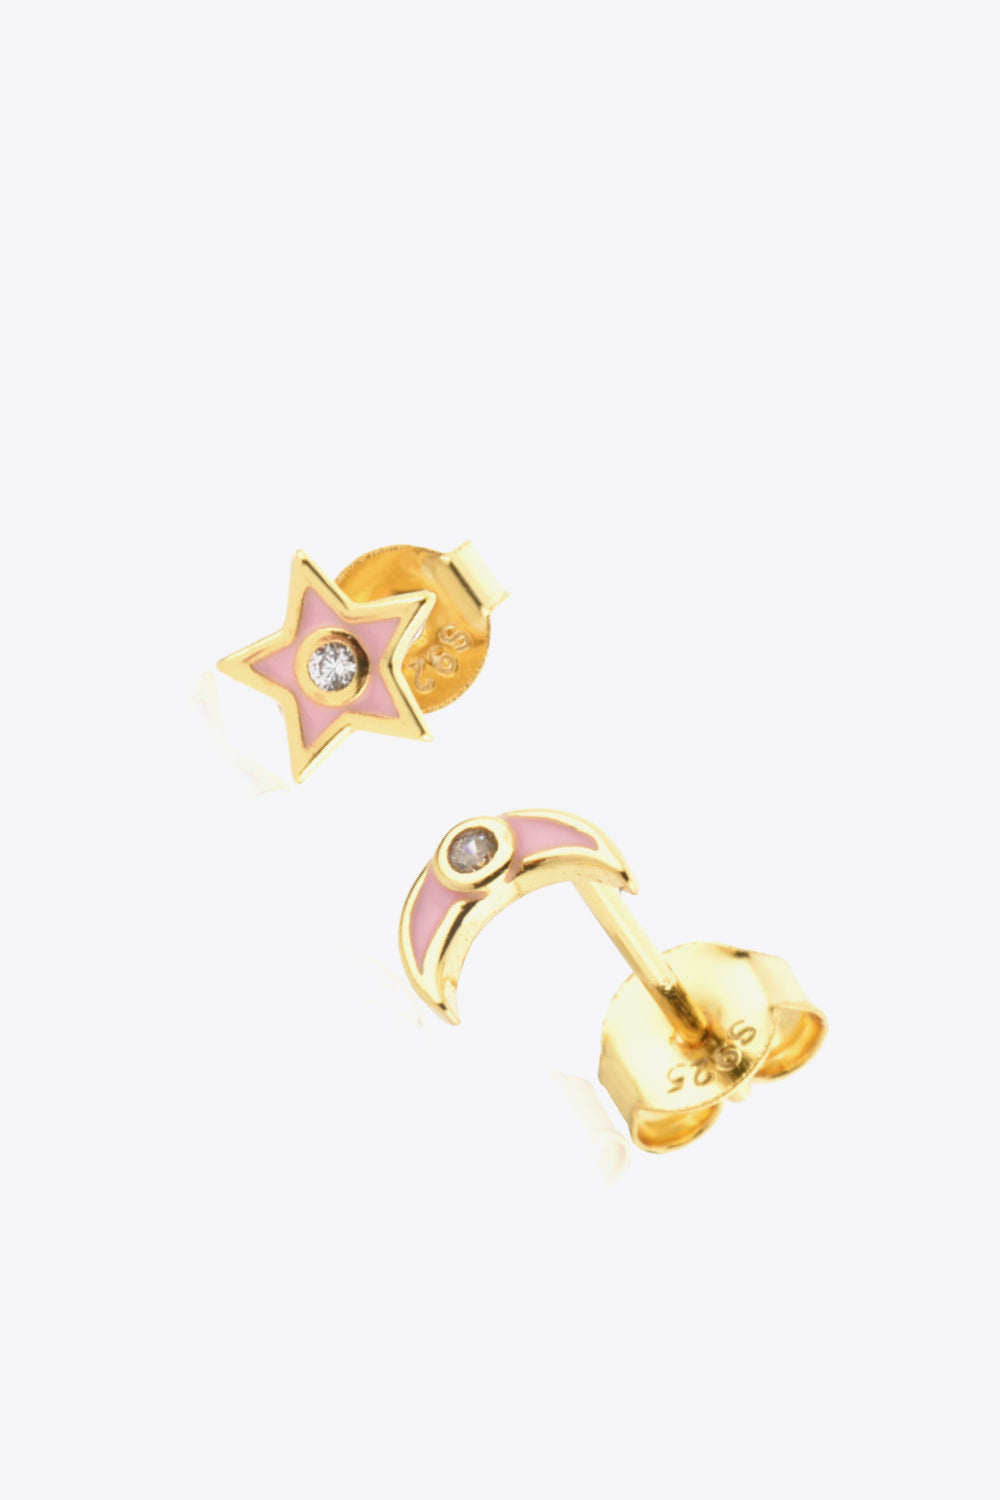 Star and Moon Zircon Mismatched Earrings - Earrings - FITGGINS